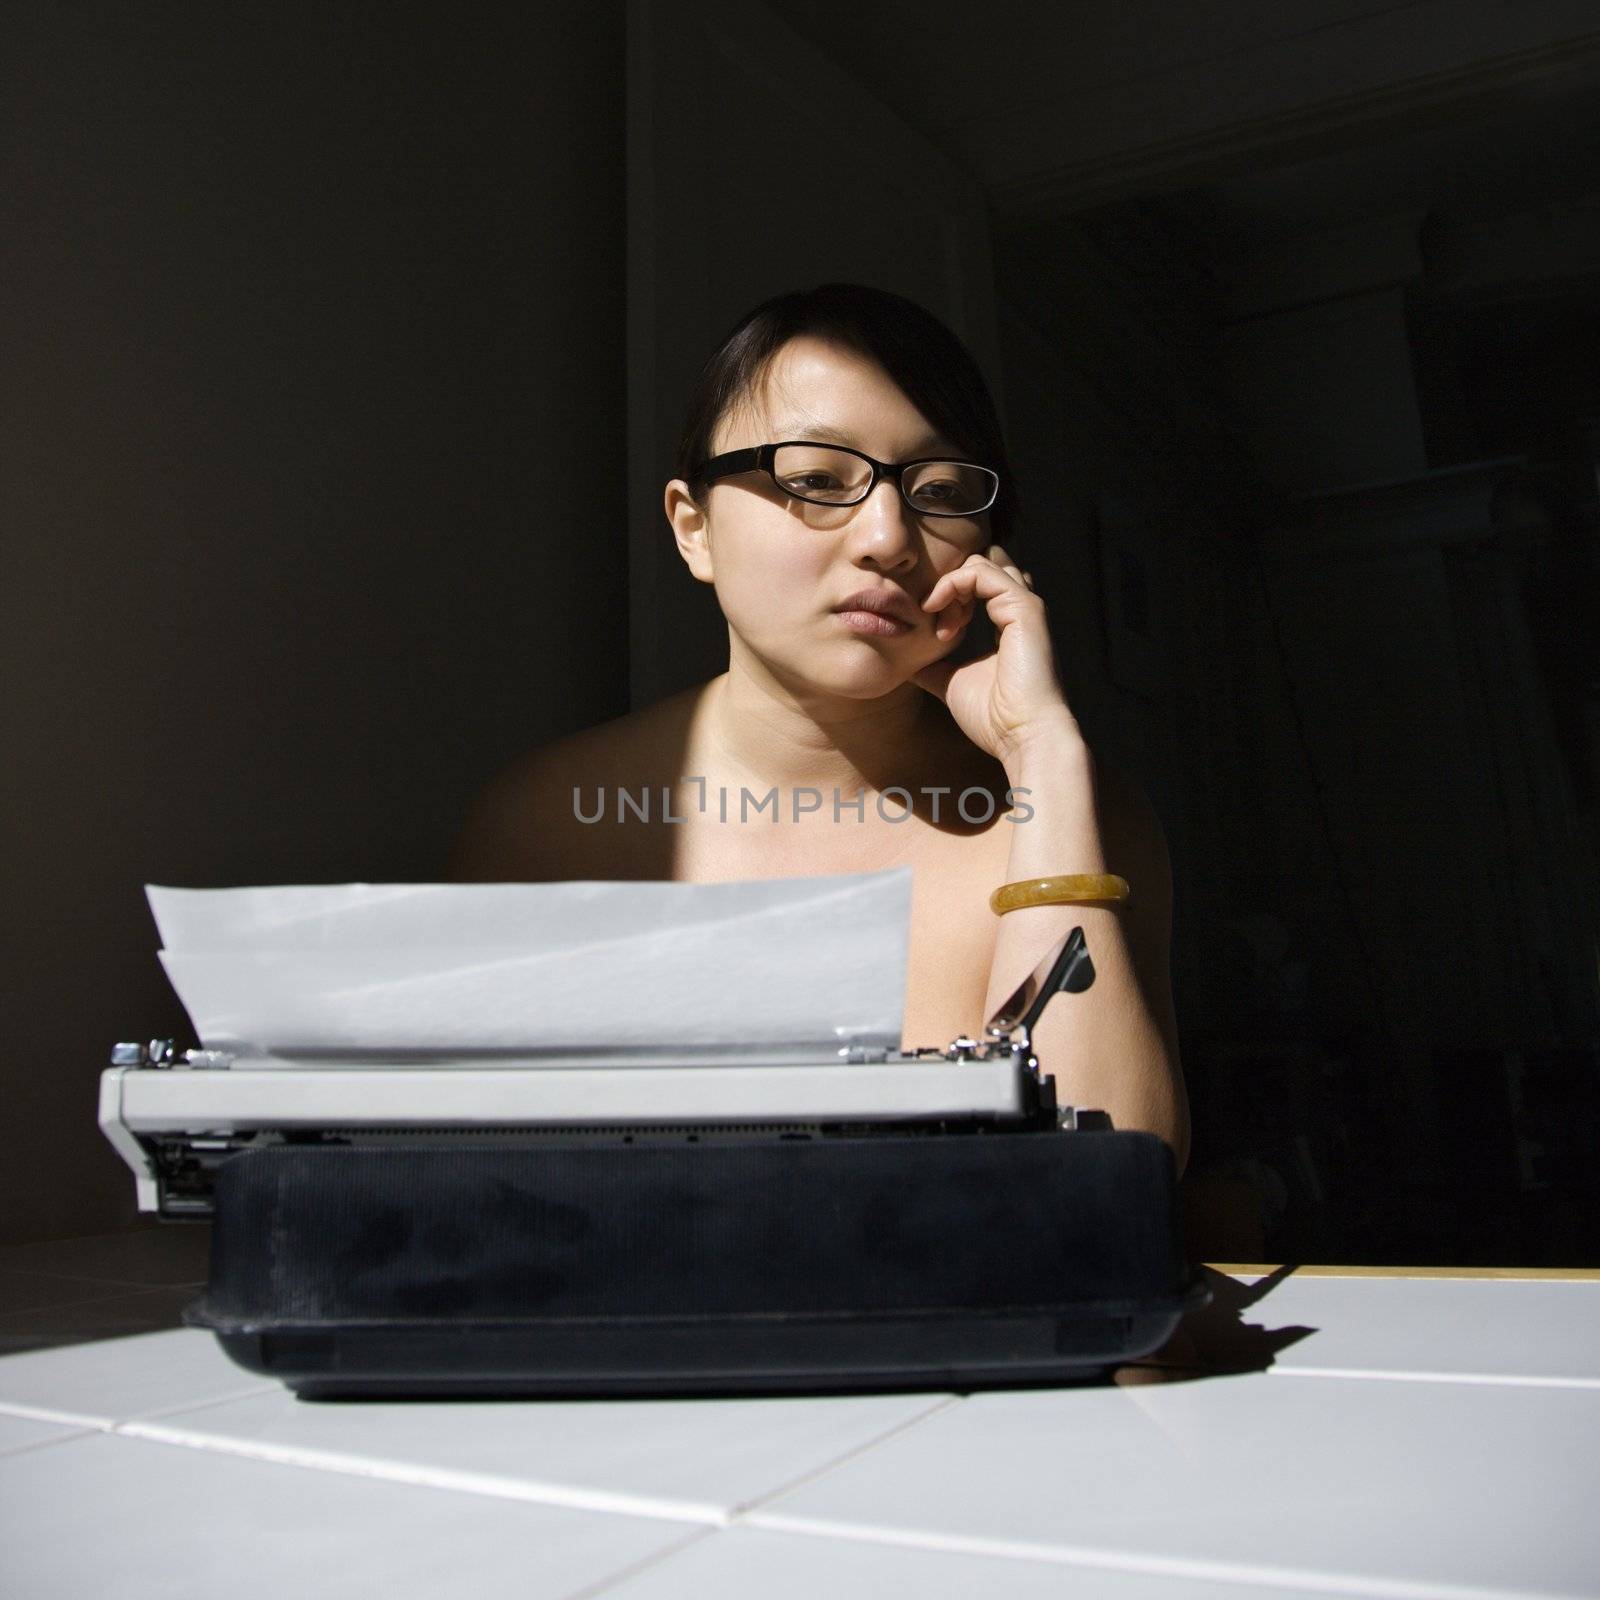 Nude young Asian woman sitting at kitchen table with typewriter.